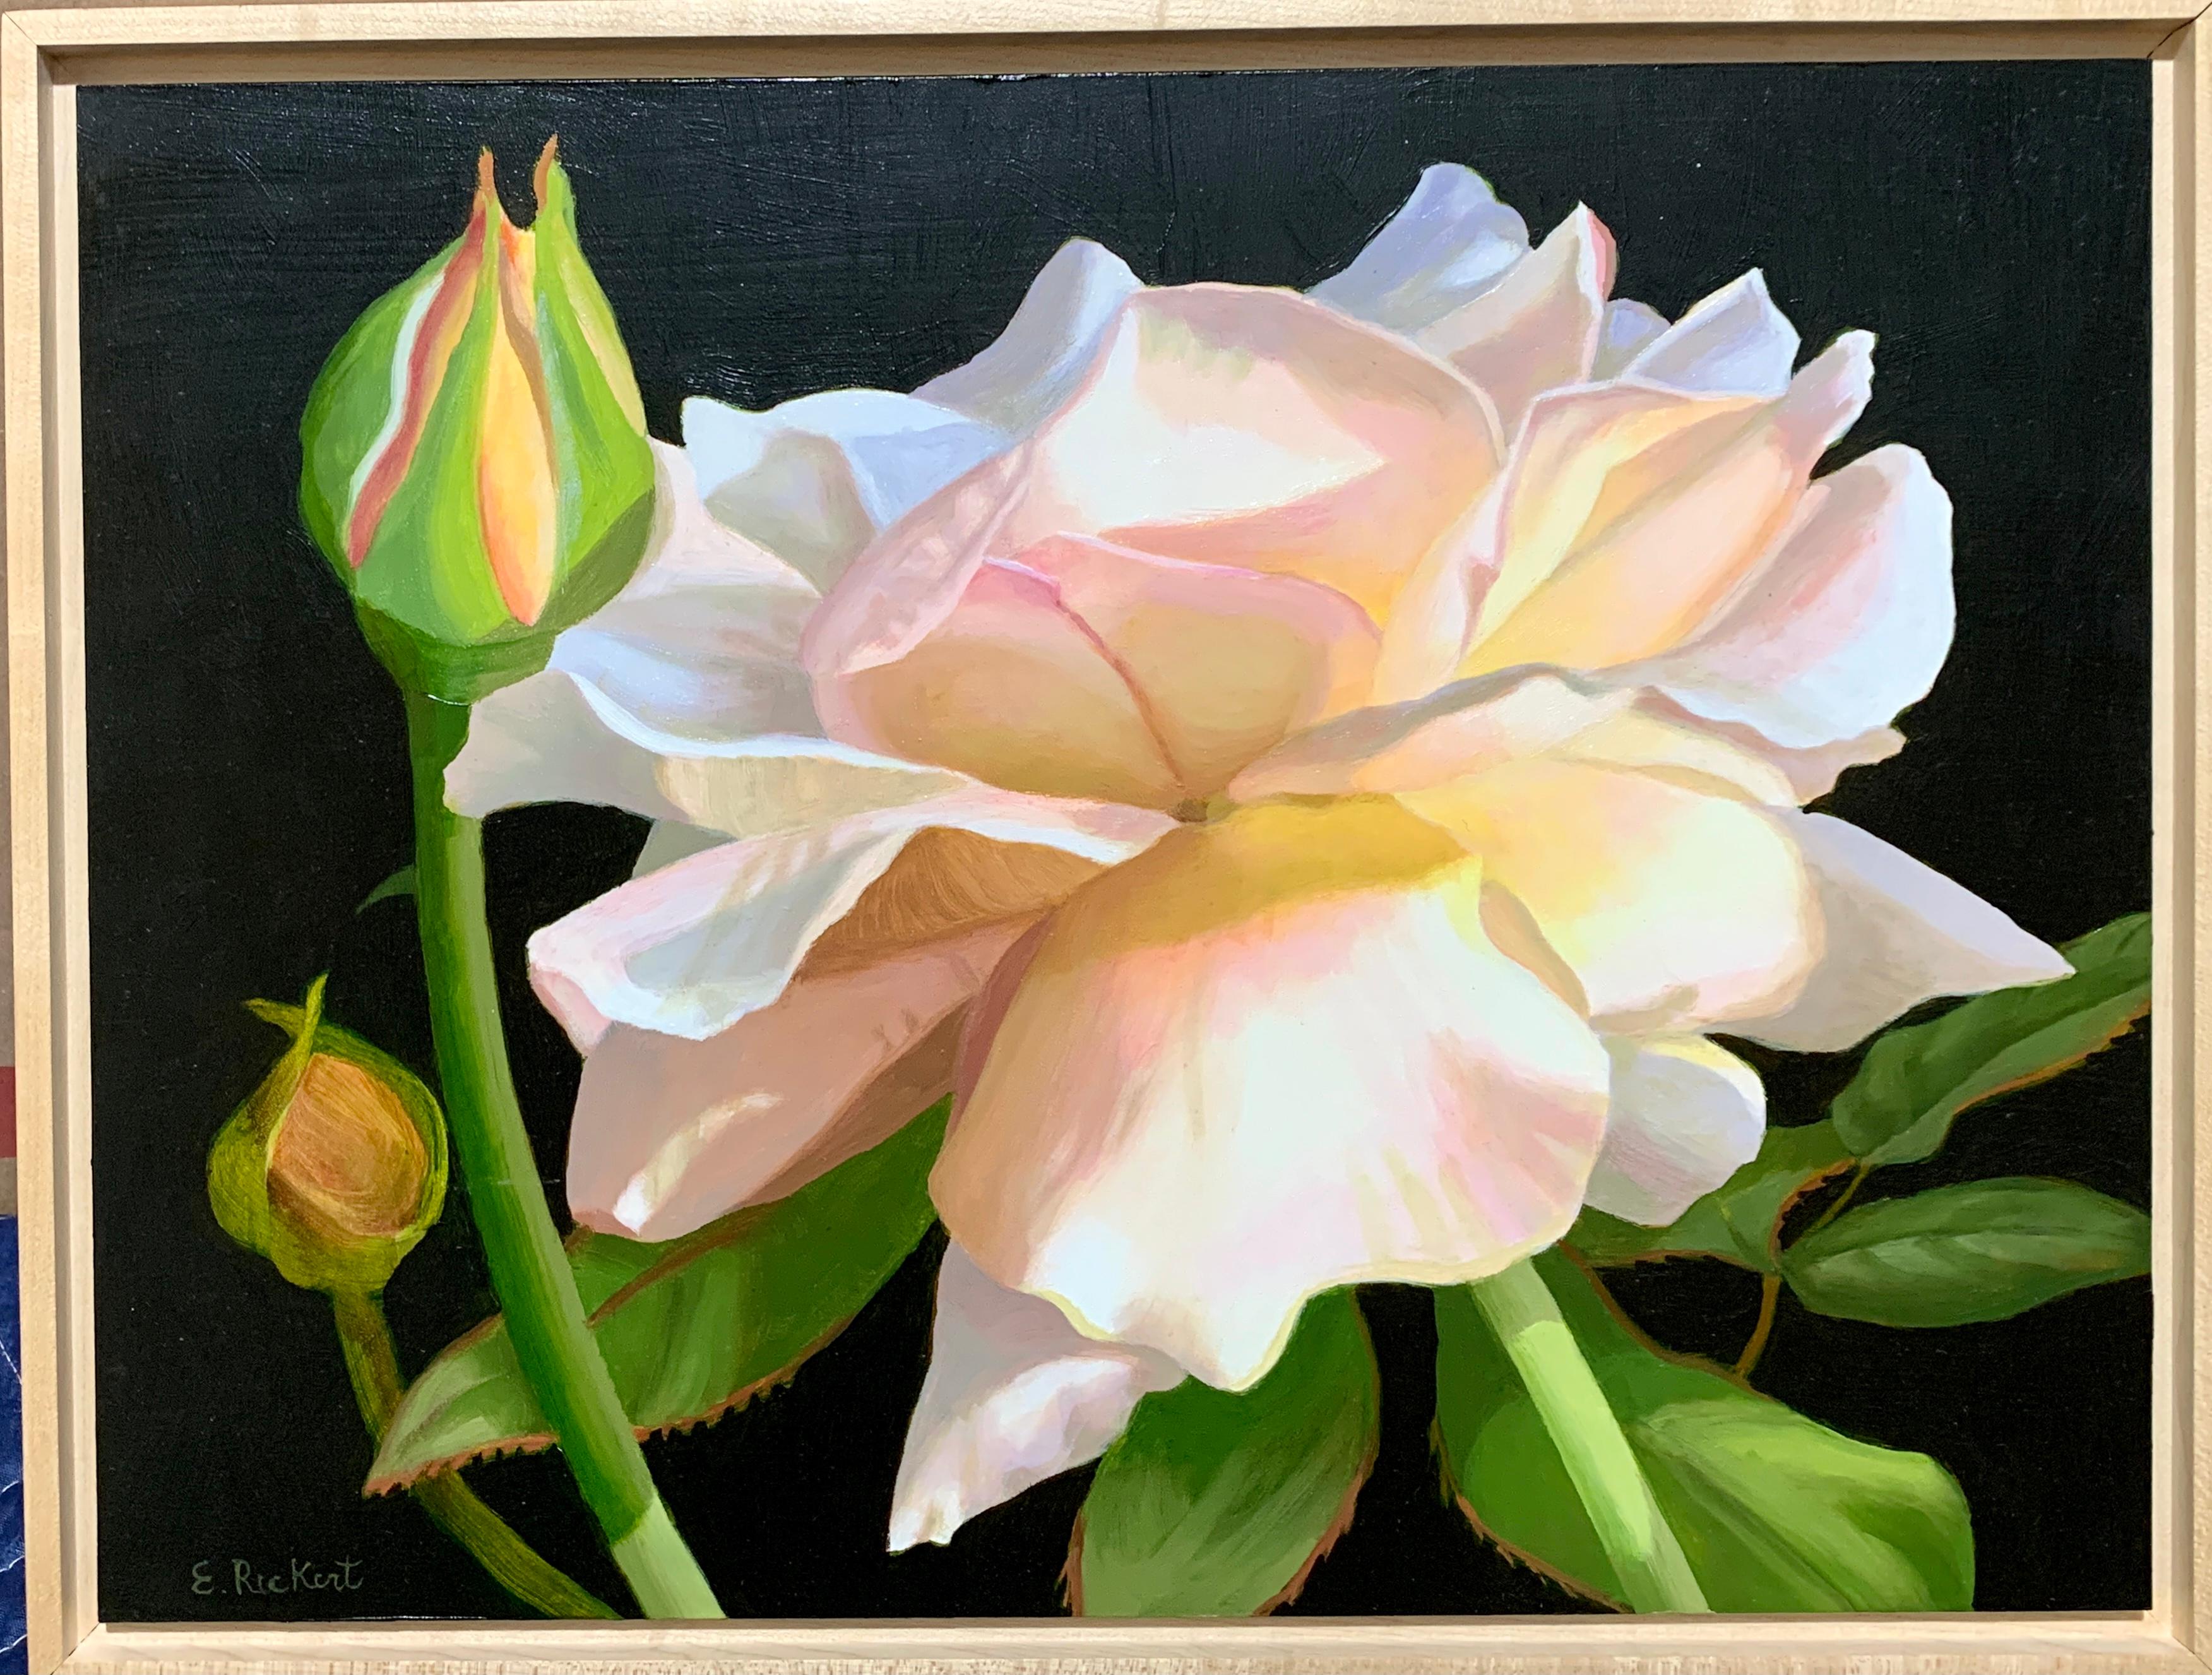 Elizabeth Rickert Figurative Painting - American Realist still life of Pink and Yellow Roses